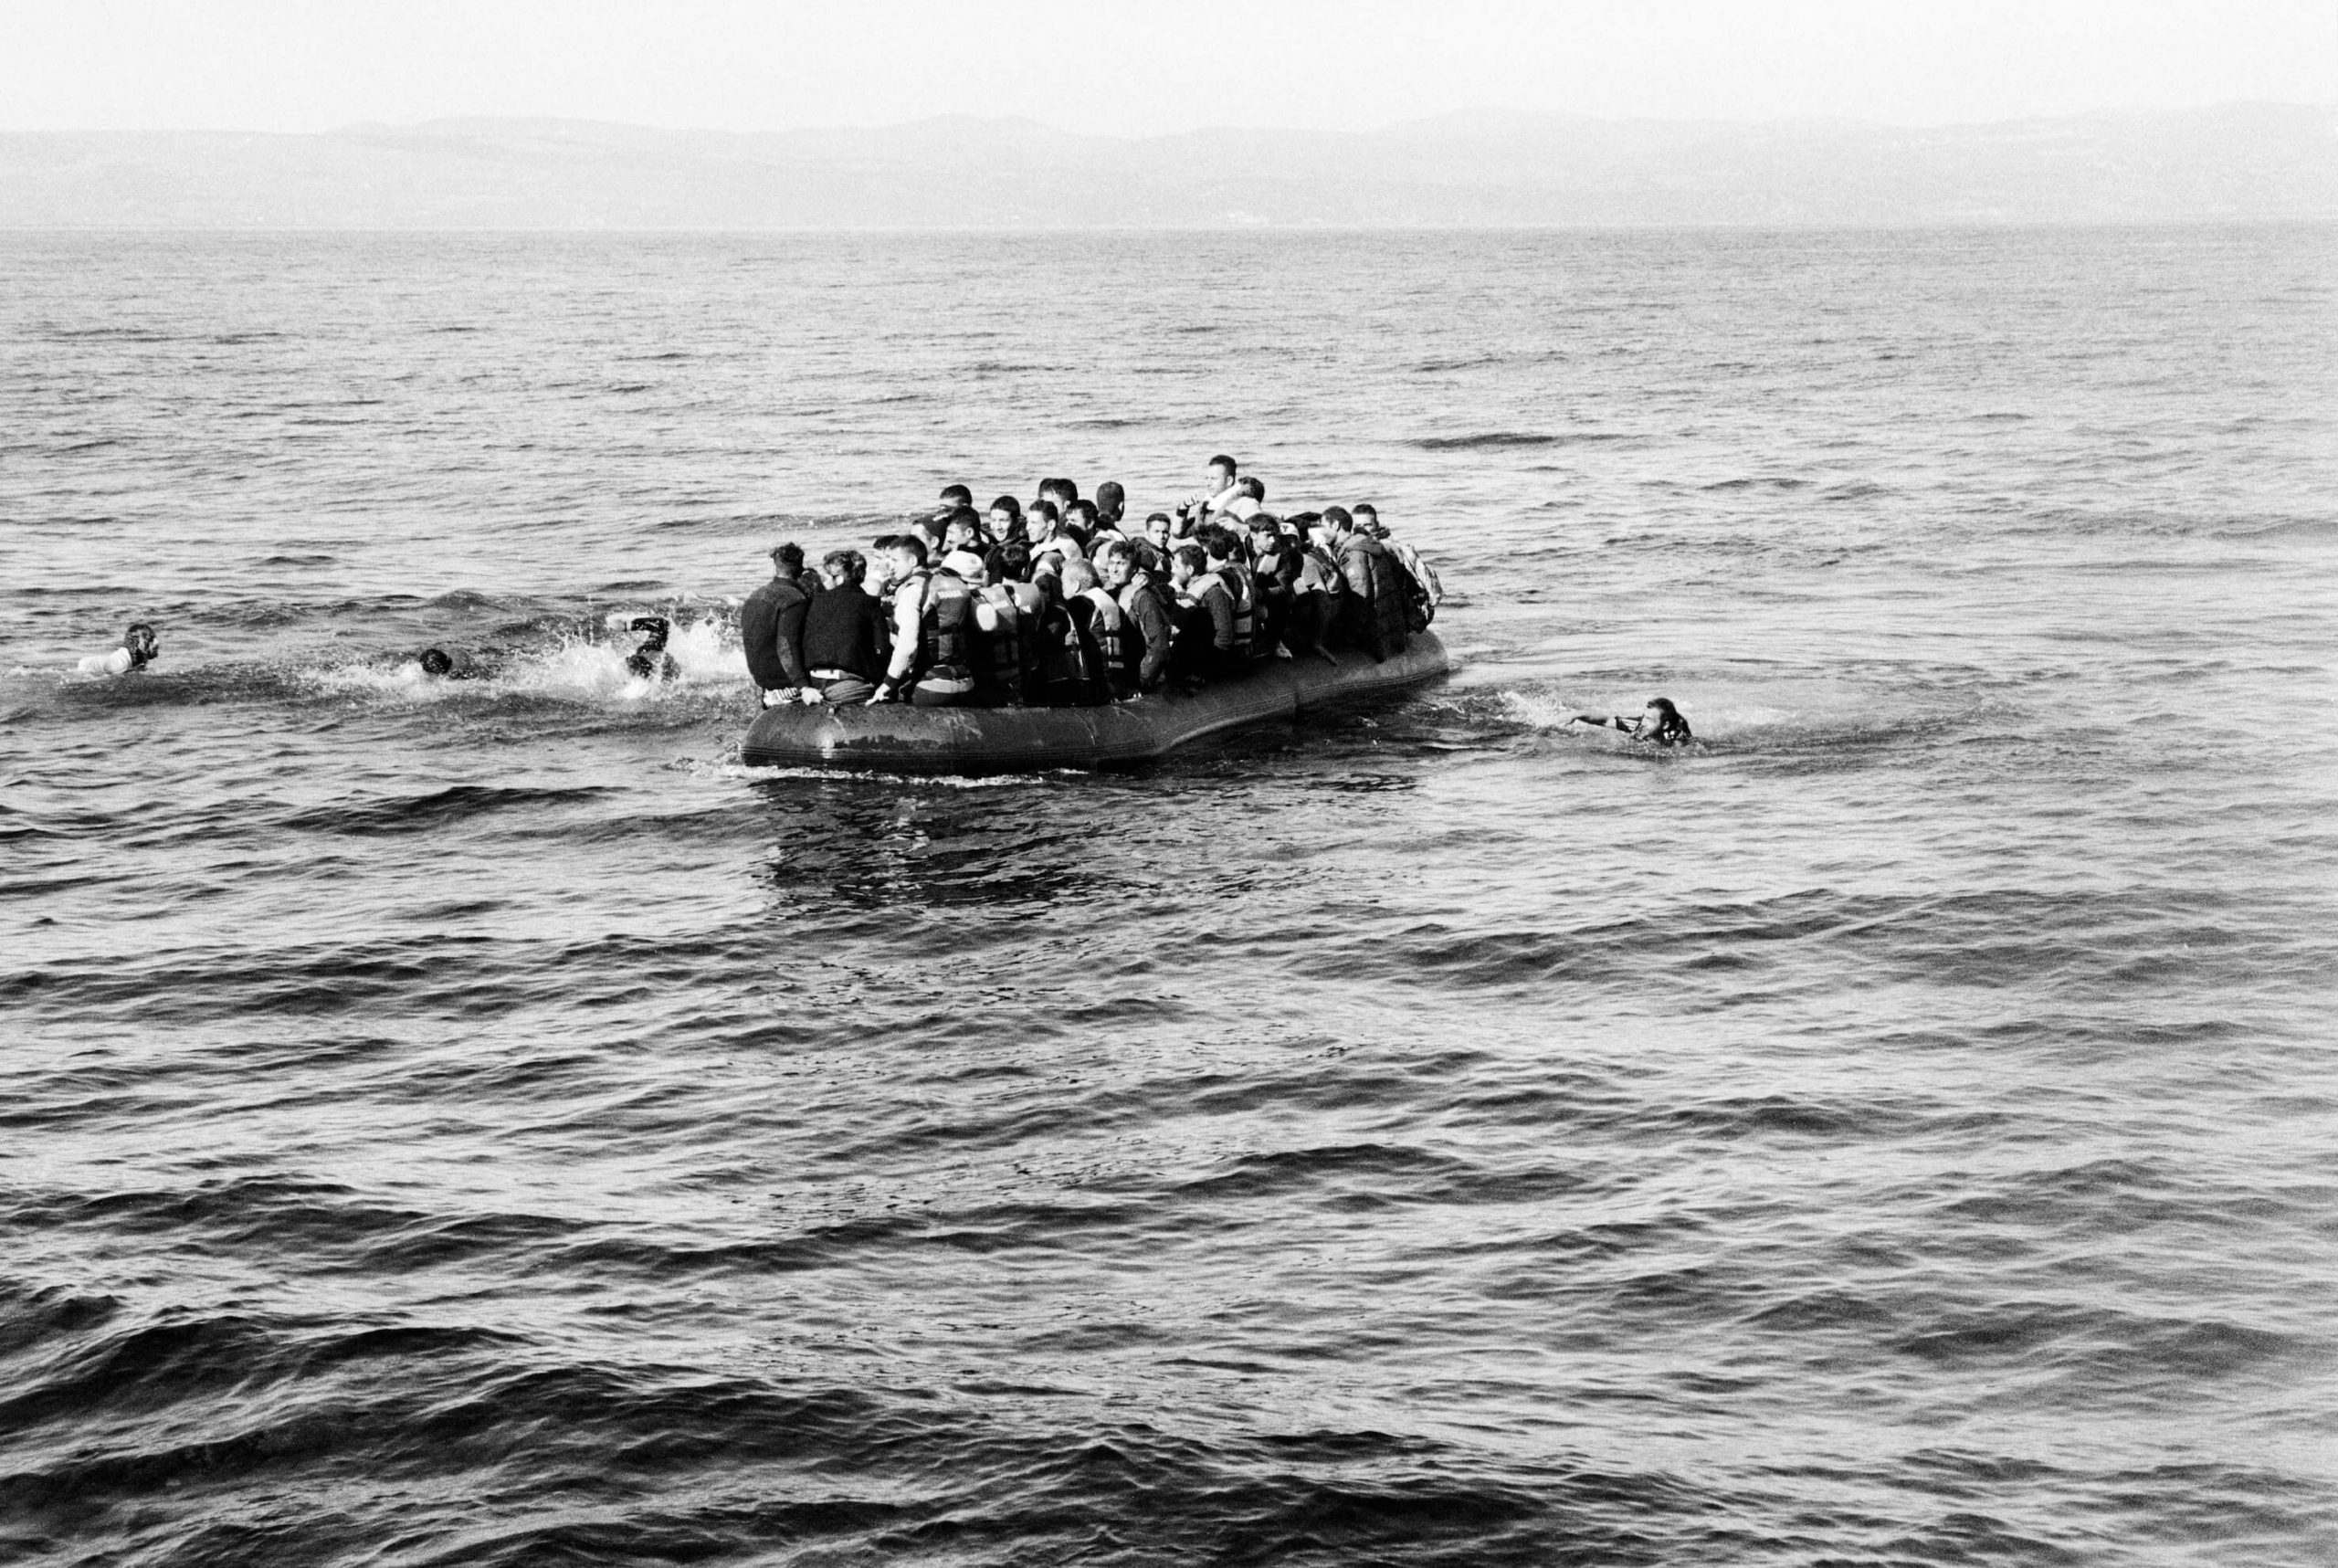 An overcrowded boat of refugees heads to the shore.